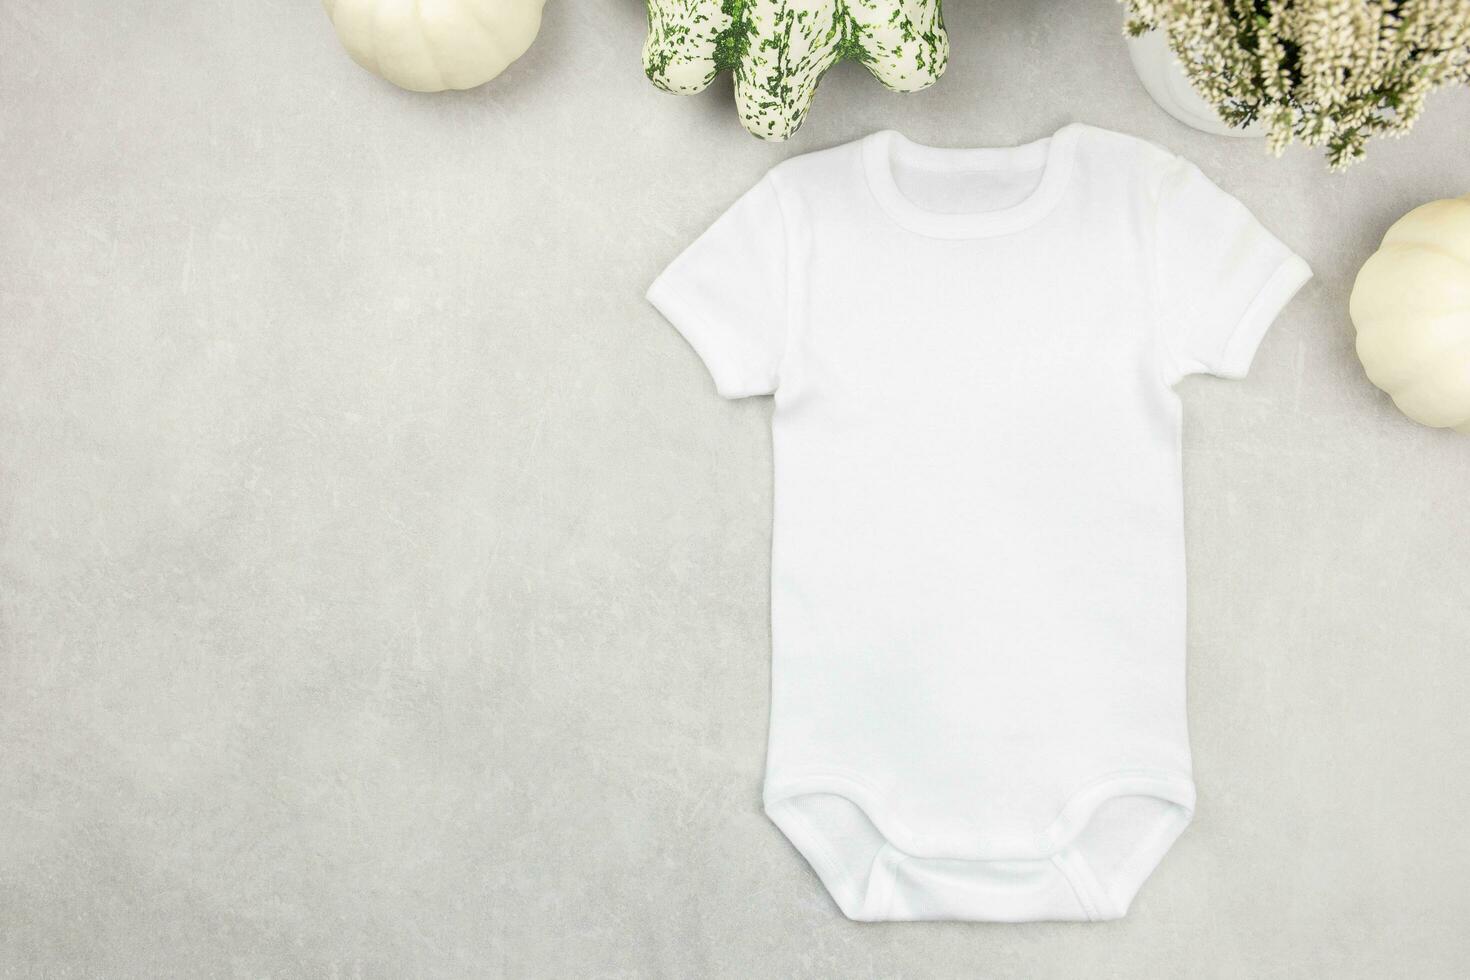 White baby girl or boy bodysuit mockup flat lay with pumpkins on gray concrete background. Design onesie template, print presentation mock up. Top view. photo